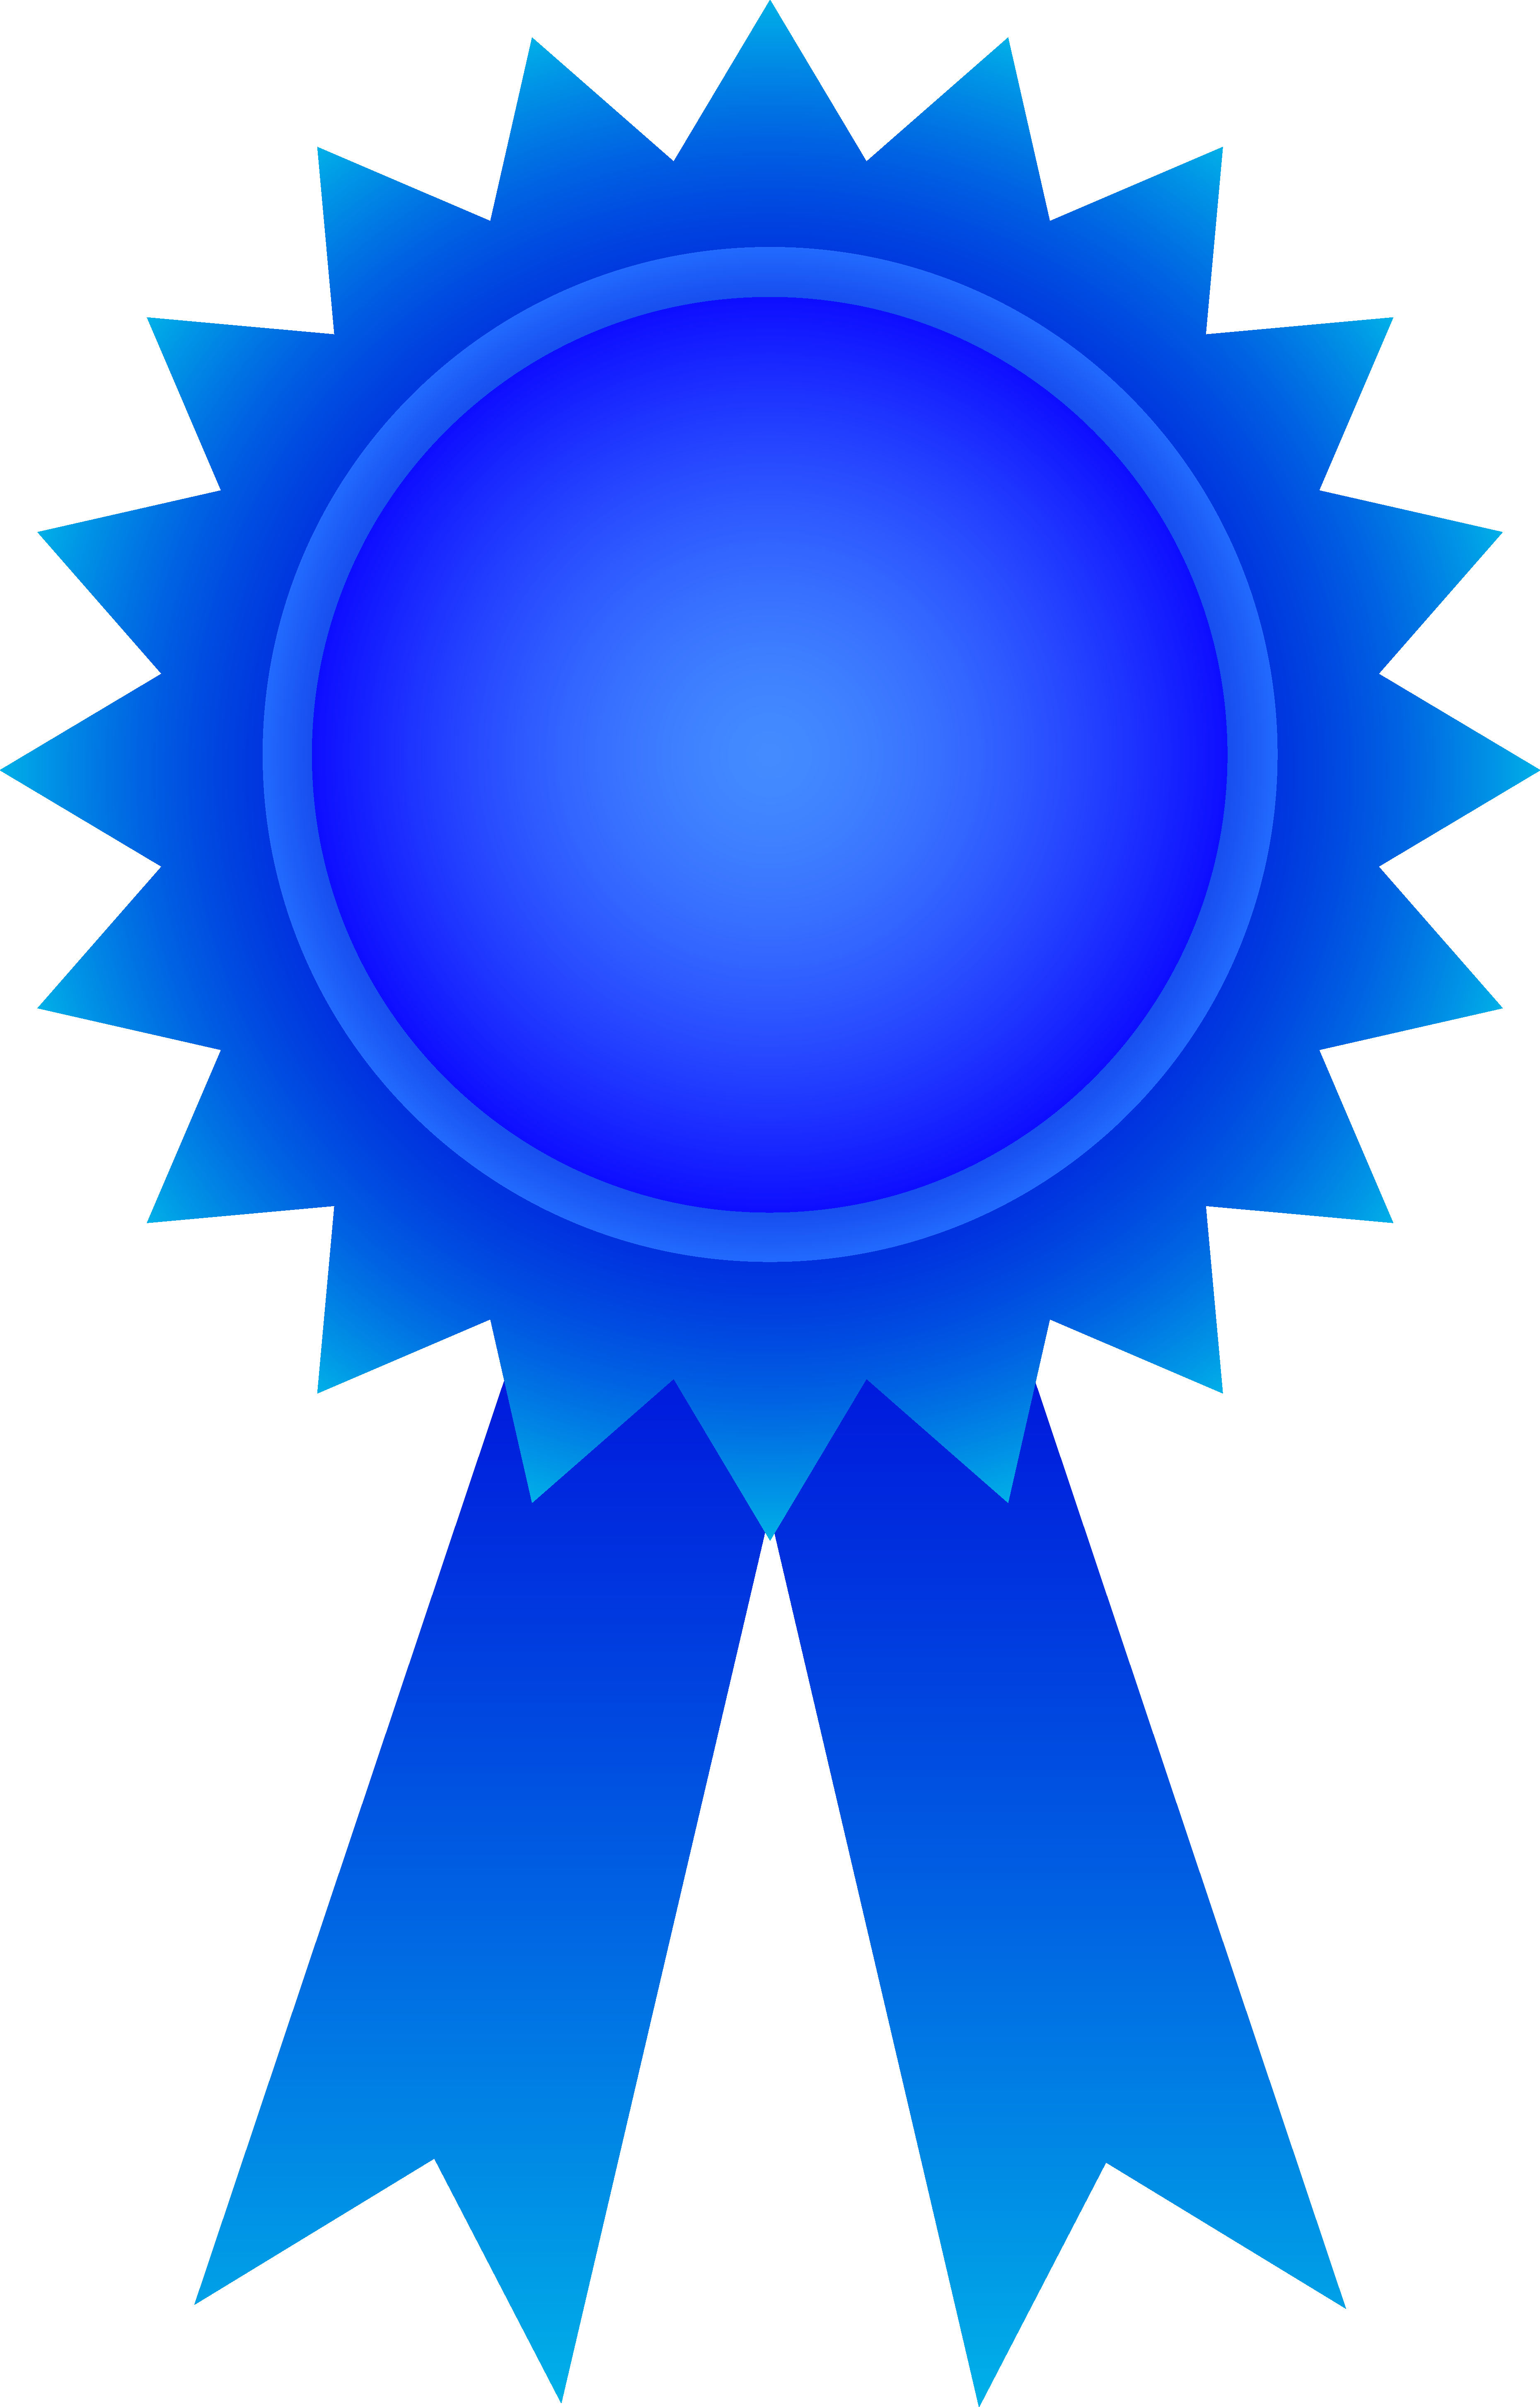 Clipart prize ribbons